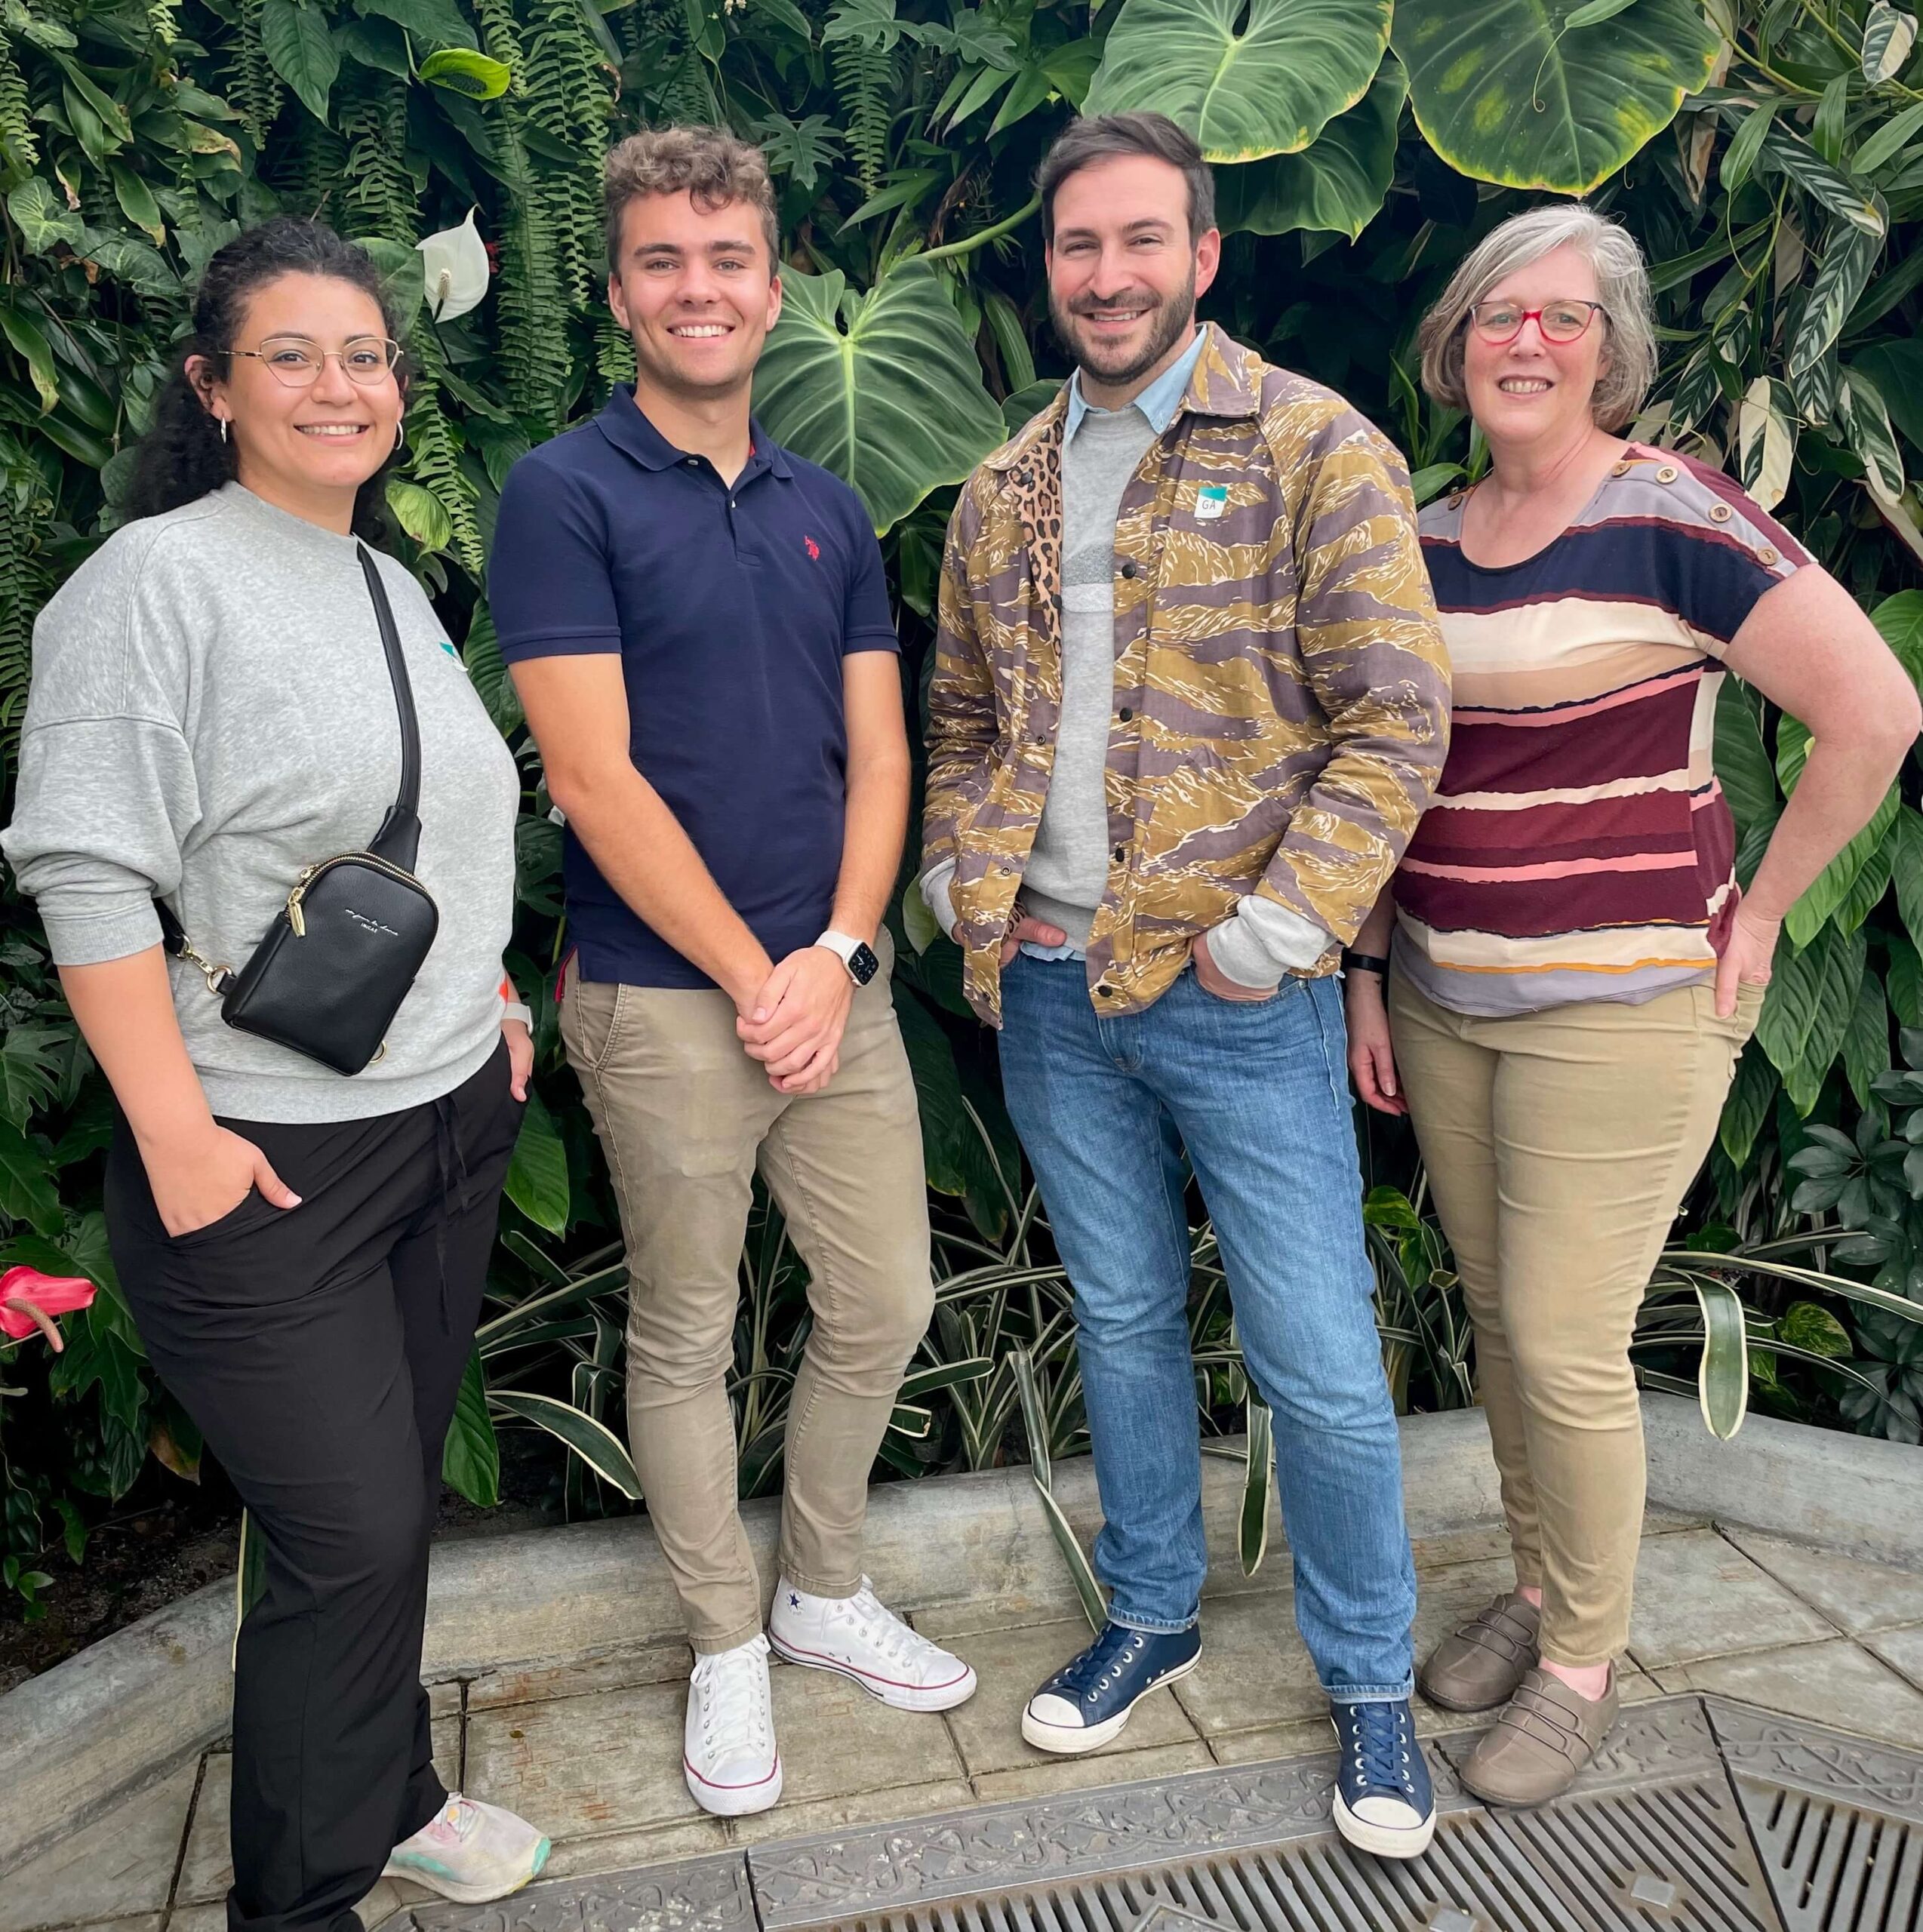 Four people stand in front of a wall of botanical greenery at the Conservatory of Flowers in San Francisco